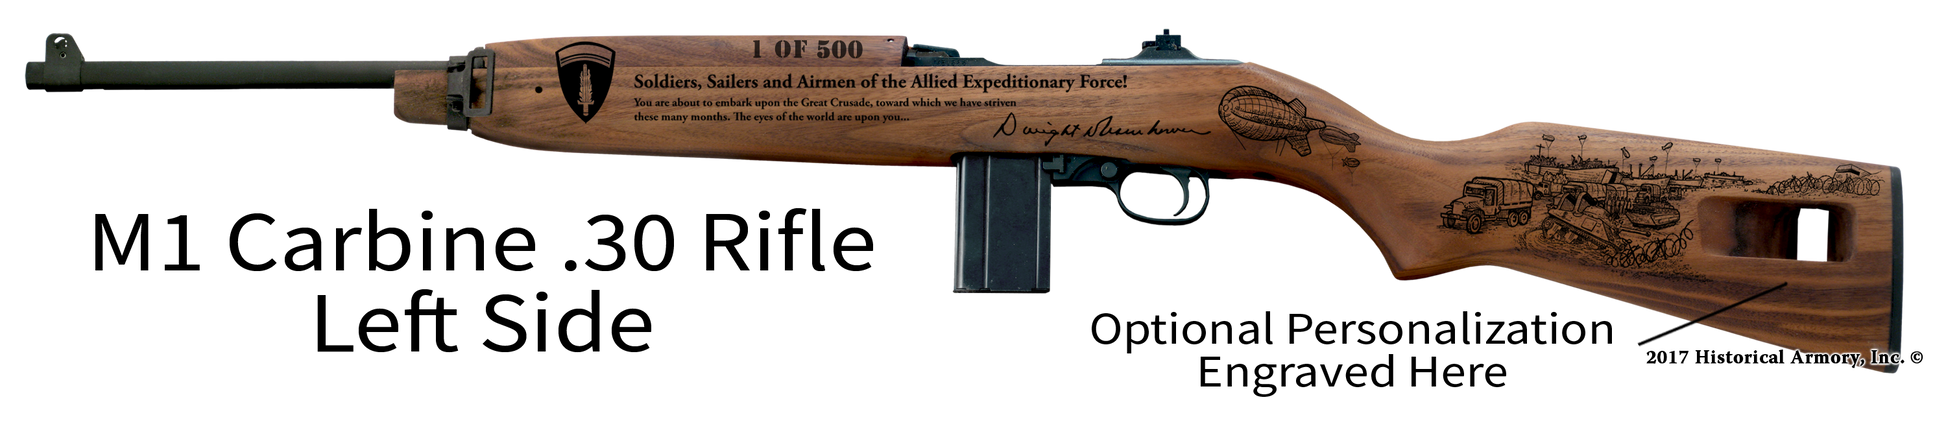 D-Day Engraved Rifle Limited Edition